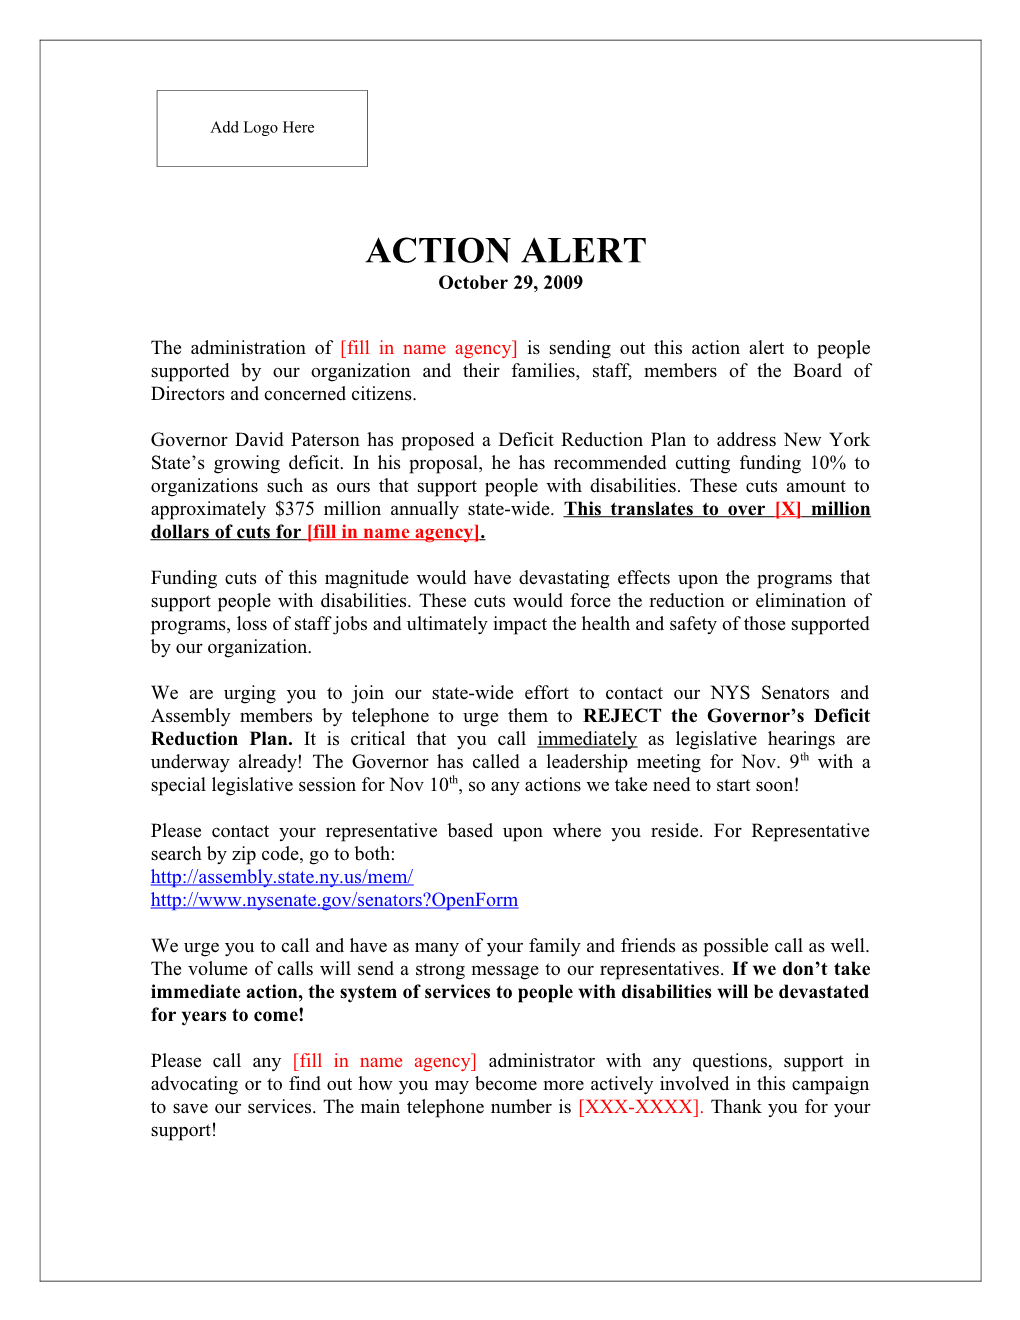 The Administration of Fill in Name Agency Is Sending out This Action Alert to Peoplesupported